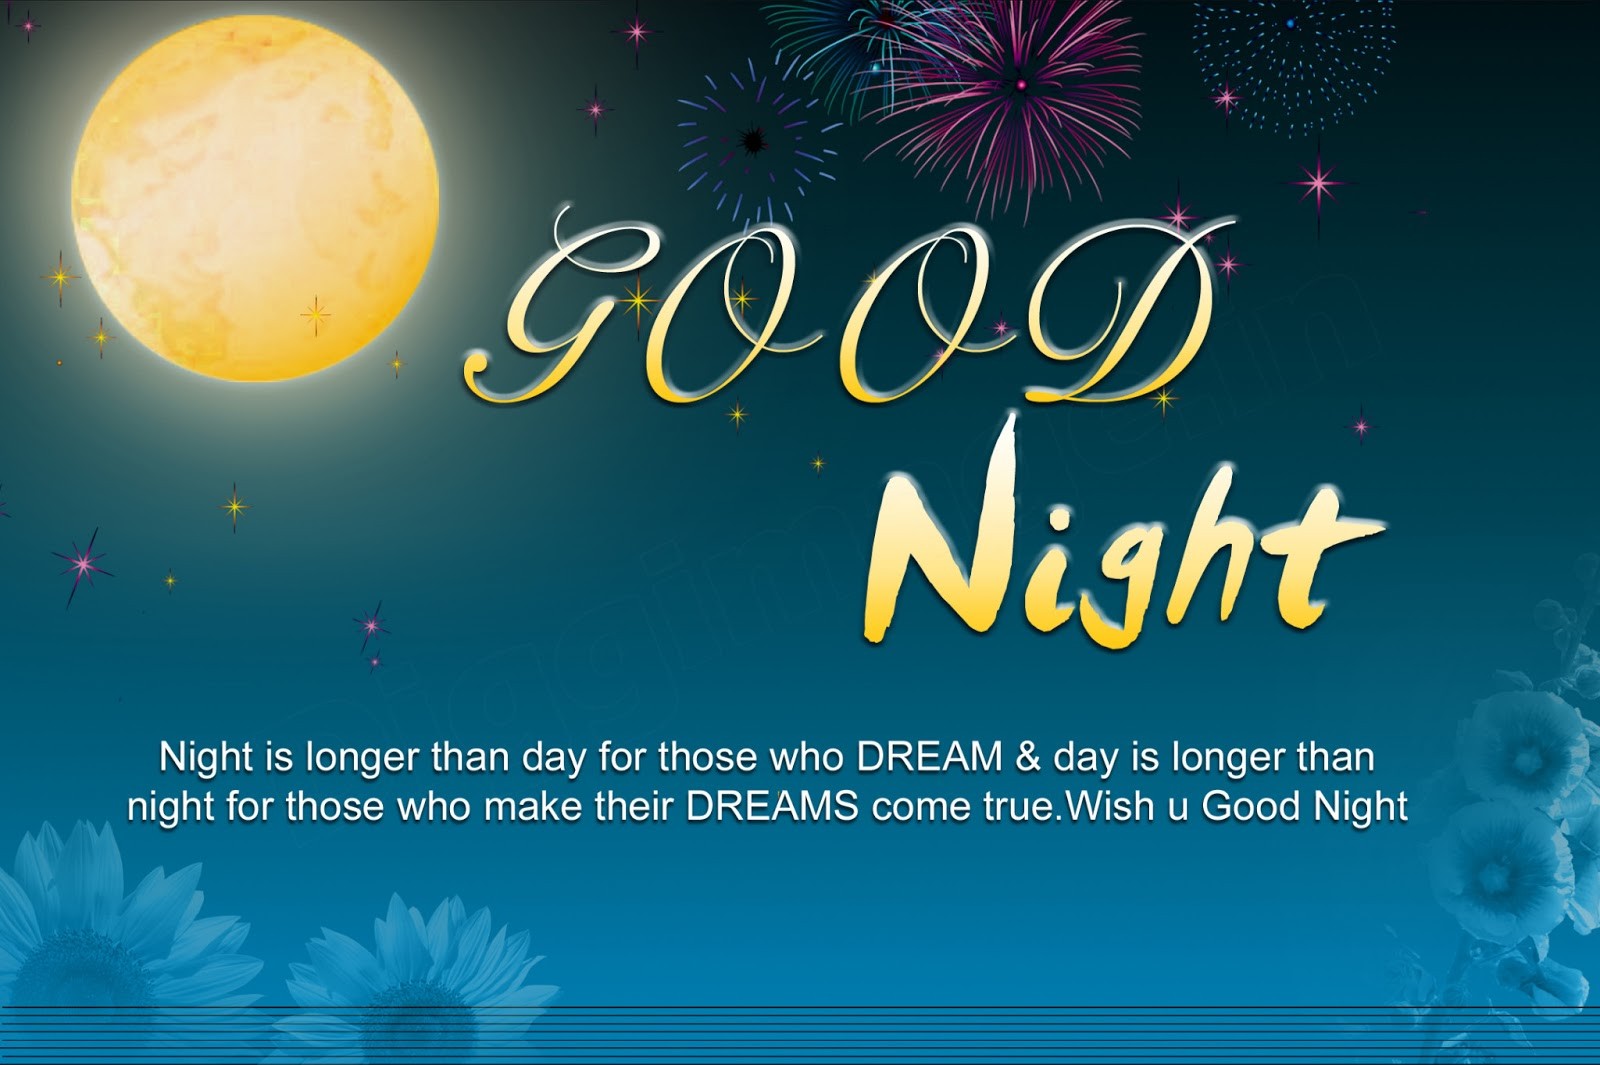 Lovely Good Night Messages Cards, SMS Wishes Images - Festival Chaska